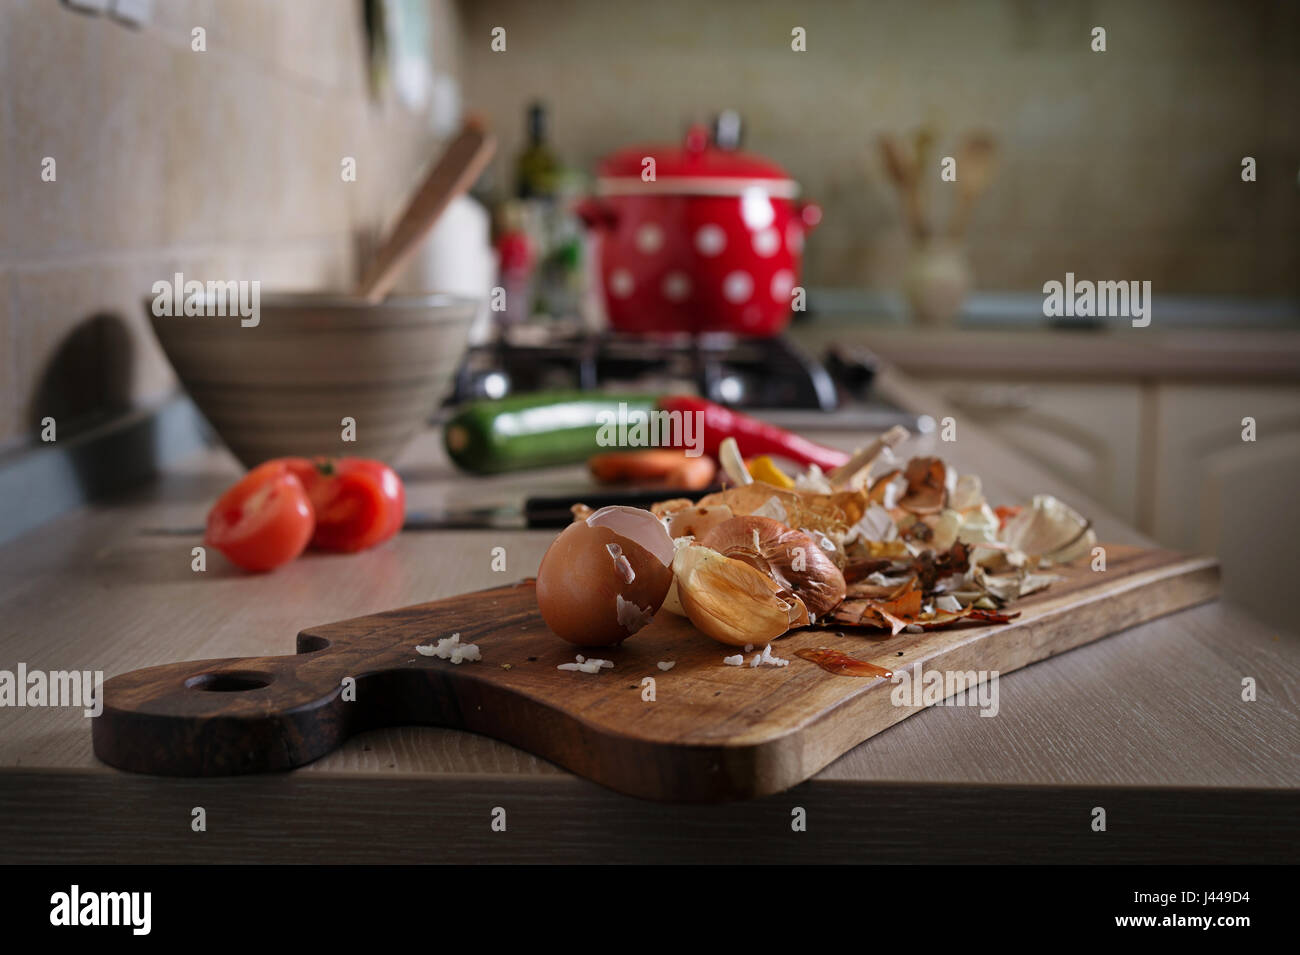 Food leftovers on kitchen counter. Household waste from vegetable ready to compost. Environmentally responsible behavior, ecology concept. Stock Photo